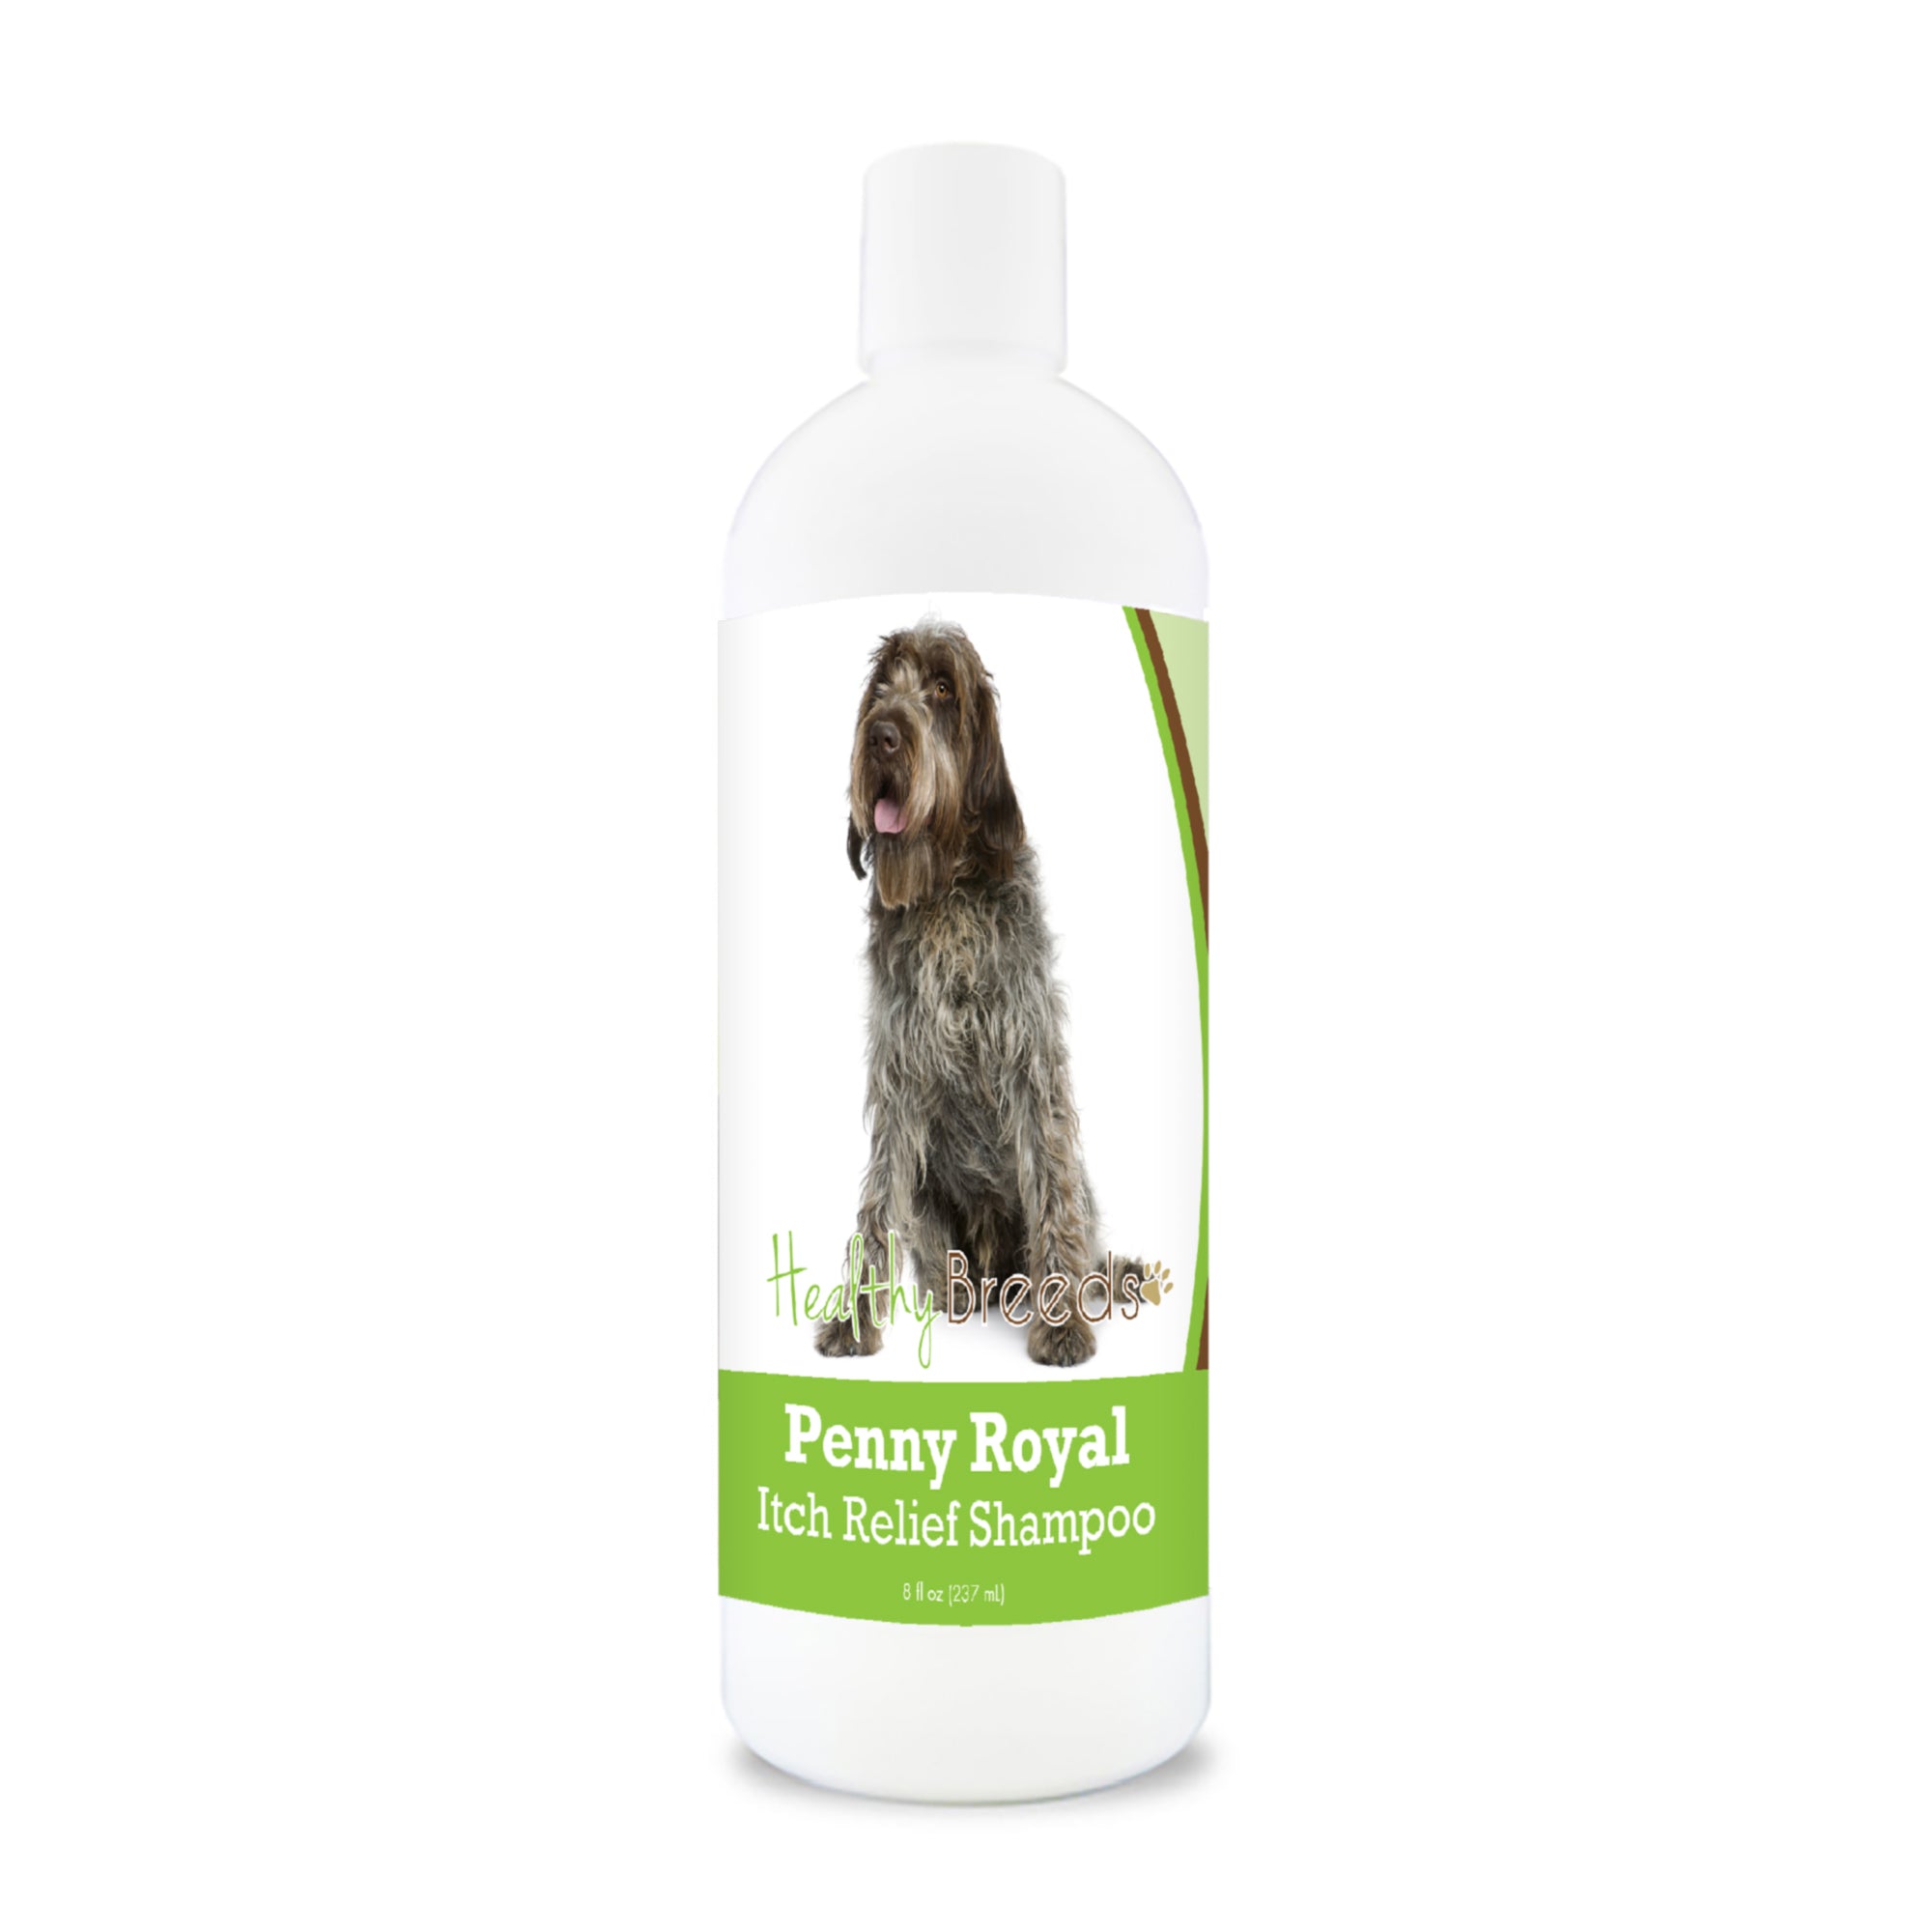 Wirehaired Pointing Griffon Penny Royal Itch Relief Shampoo 8 oz